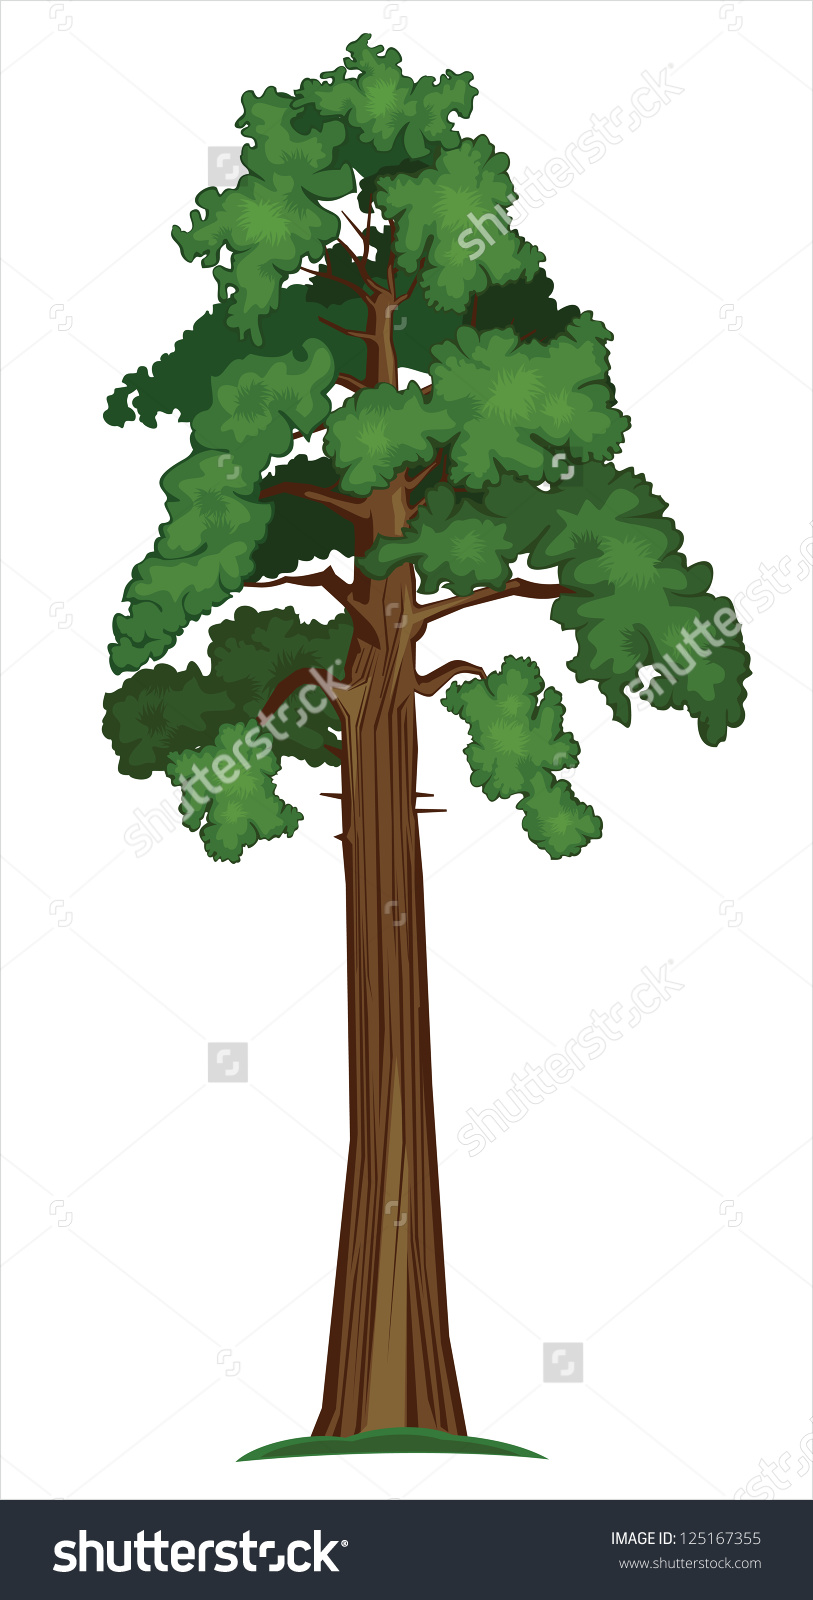 Sequoia clipart #20, Download drawings